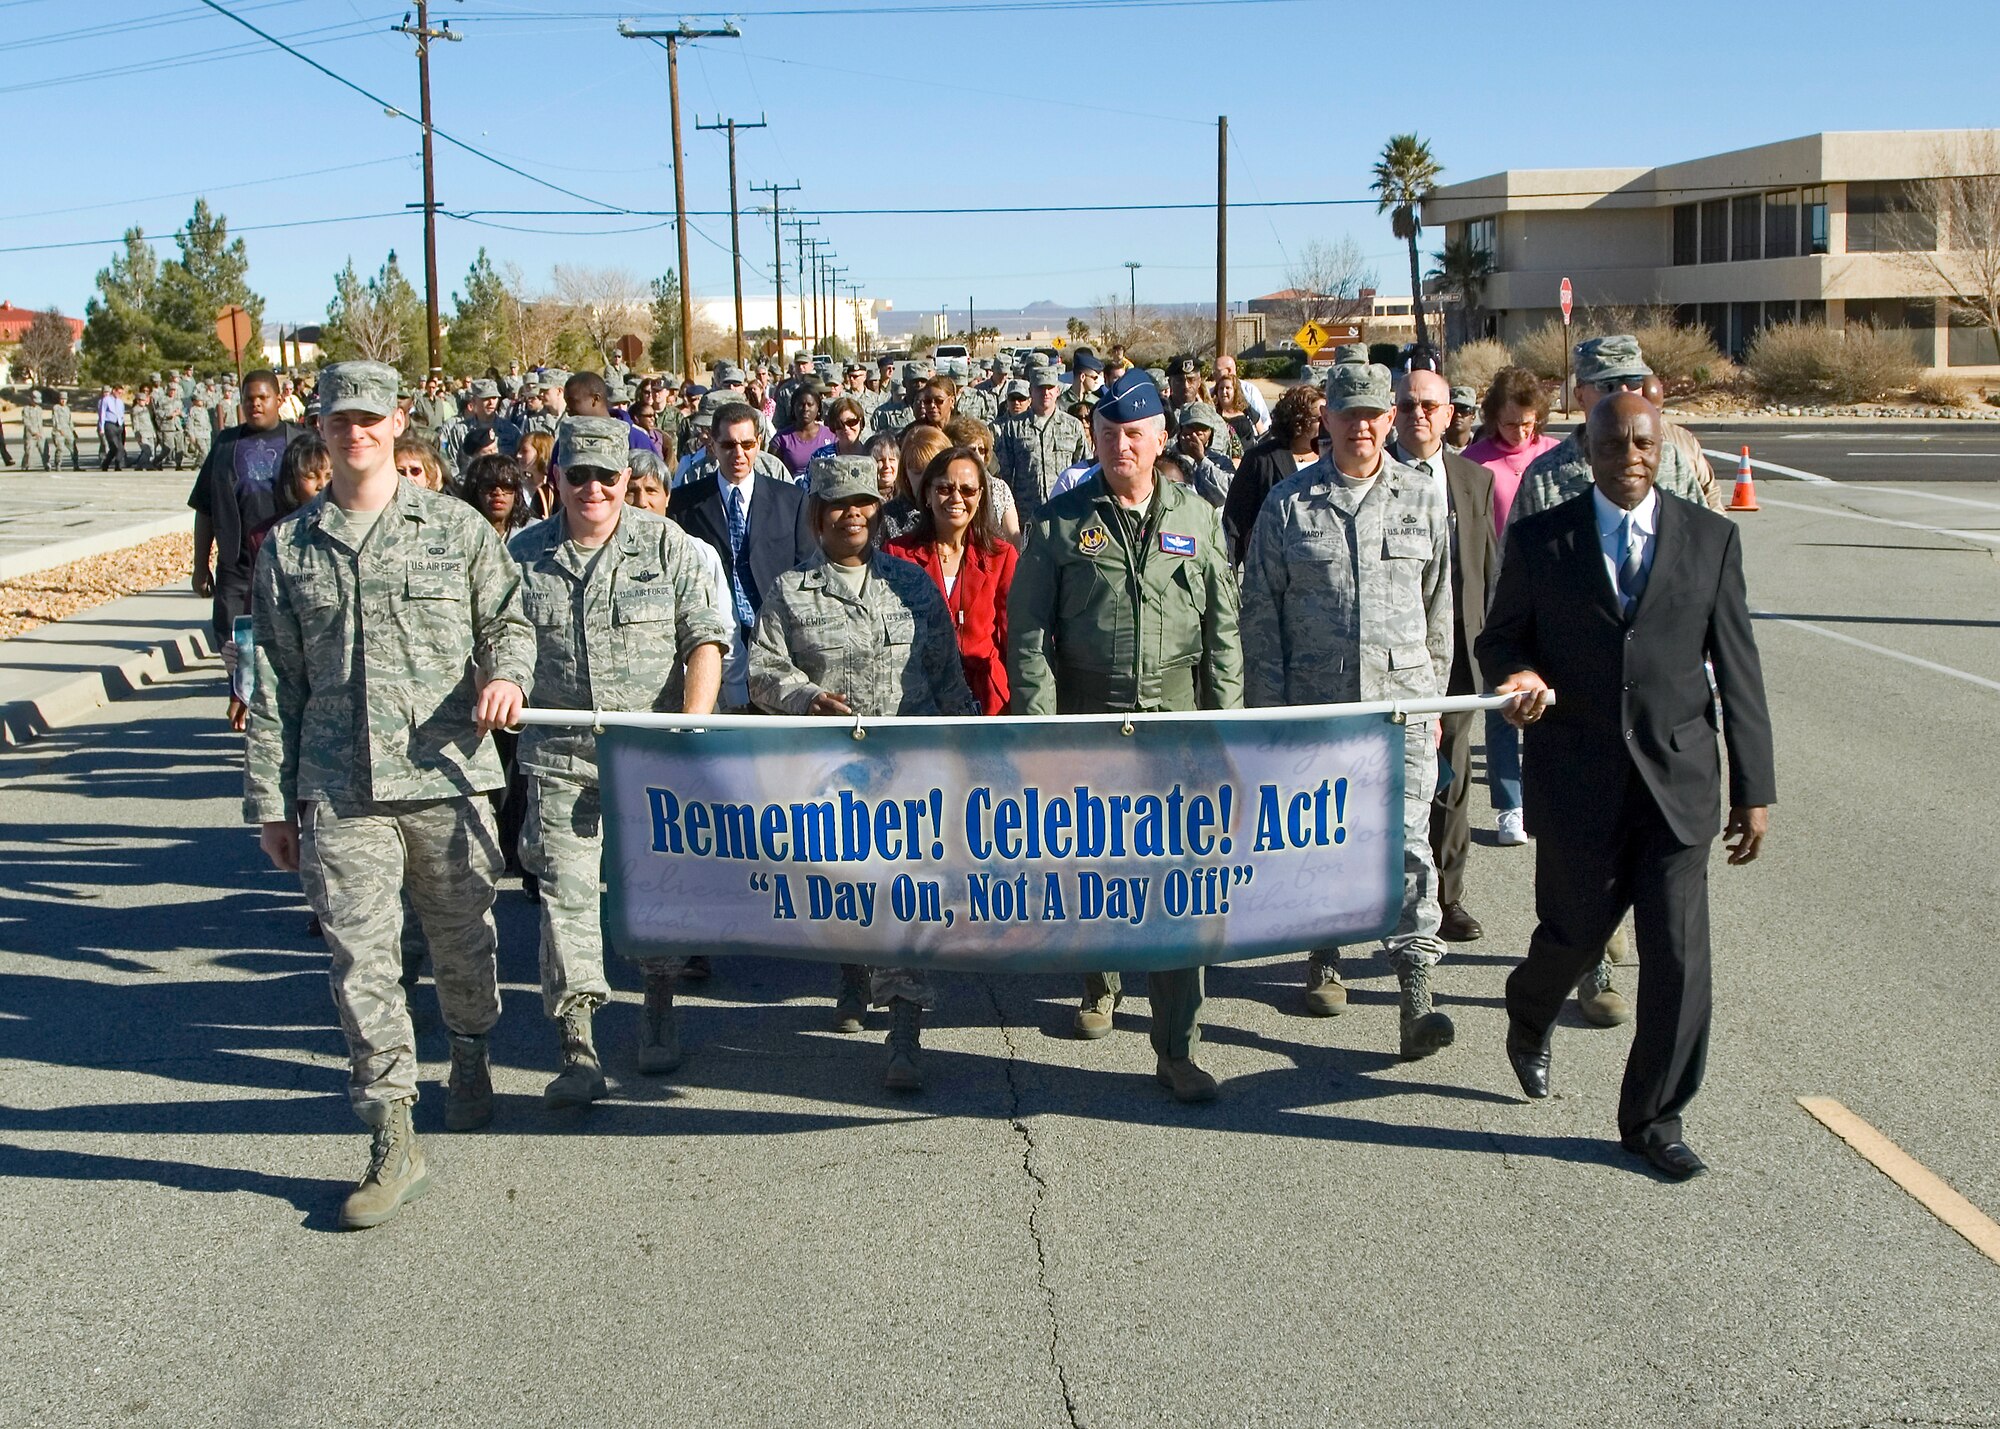 Maj. Gen. David Eichhorn(right), Air Force Flight Test Center commander, along with Lt. Col. Susie Lewis, 95th Force Support Squadron commander and Col. Jerry Gandy(left), 95th Air Base Wing commander, lead more that 250 Edwards Airmen in a march from 95th Air Base Wing Headquarters to chapel 1 Dec. 14. (Air Force photo/Heather Anhalt)

